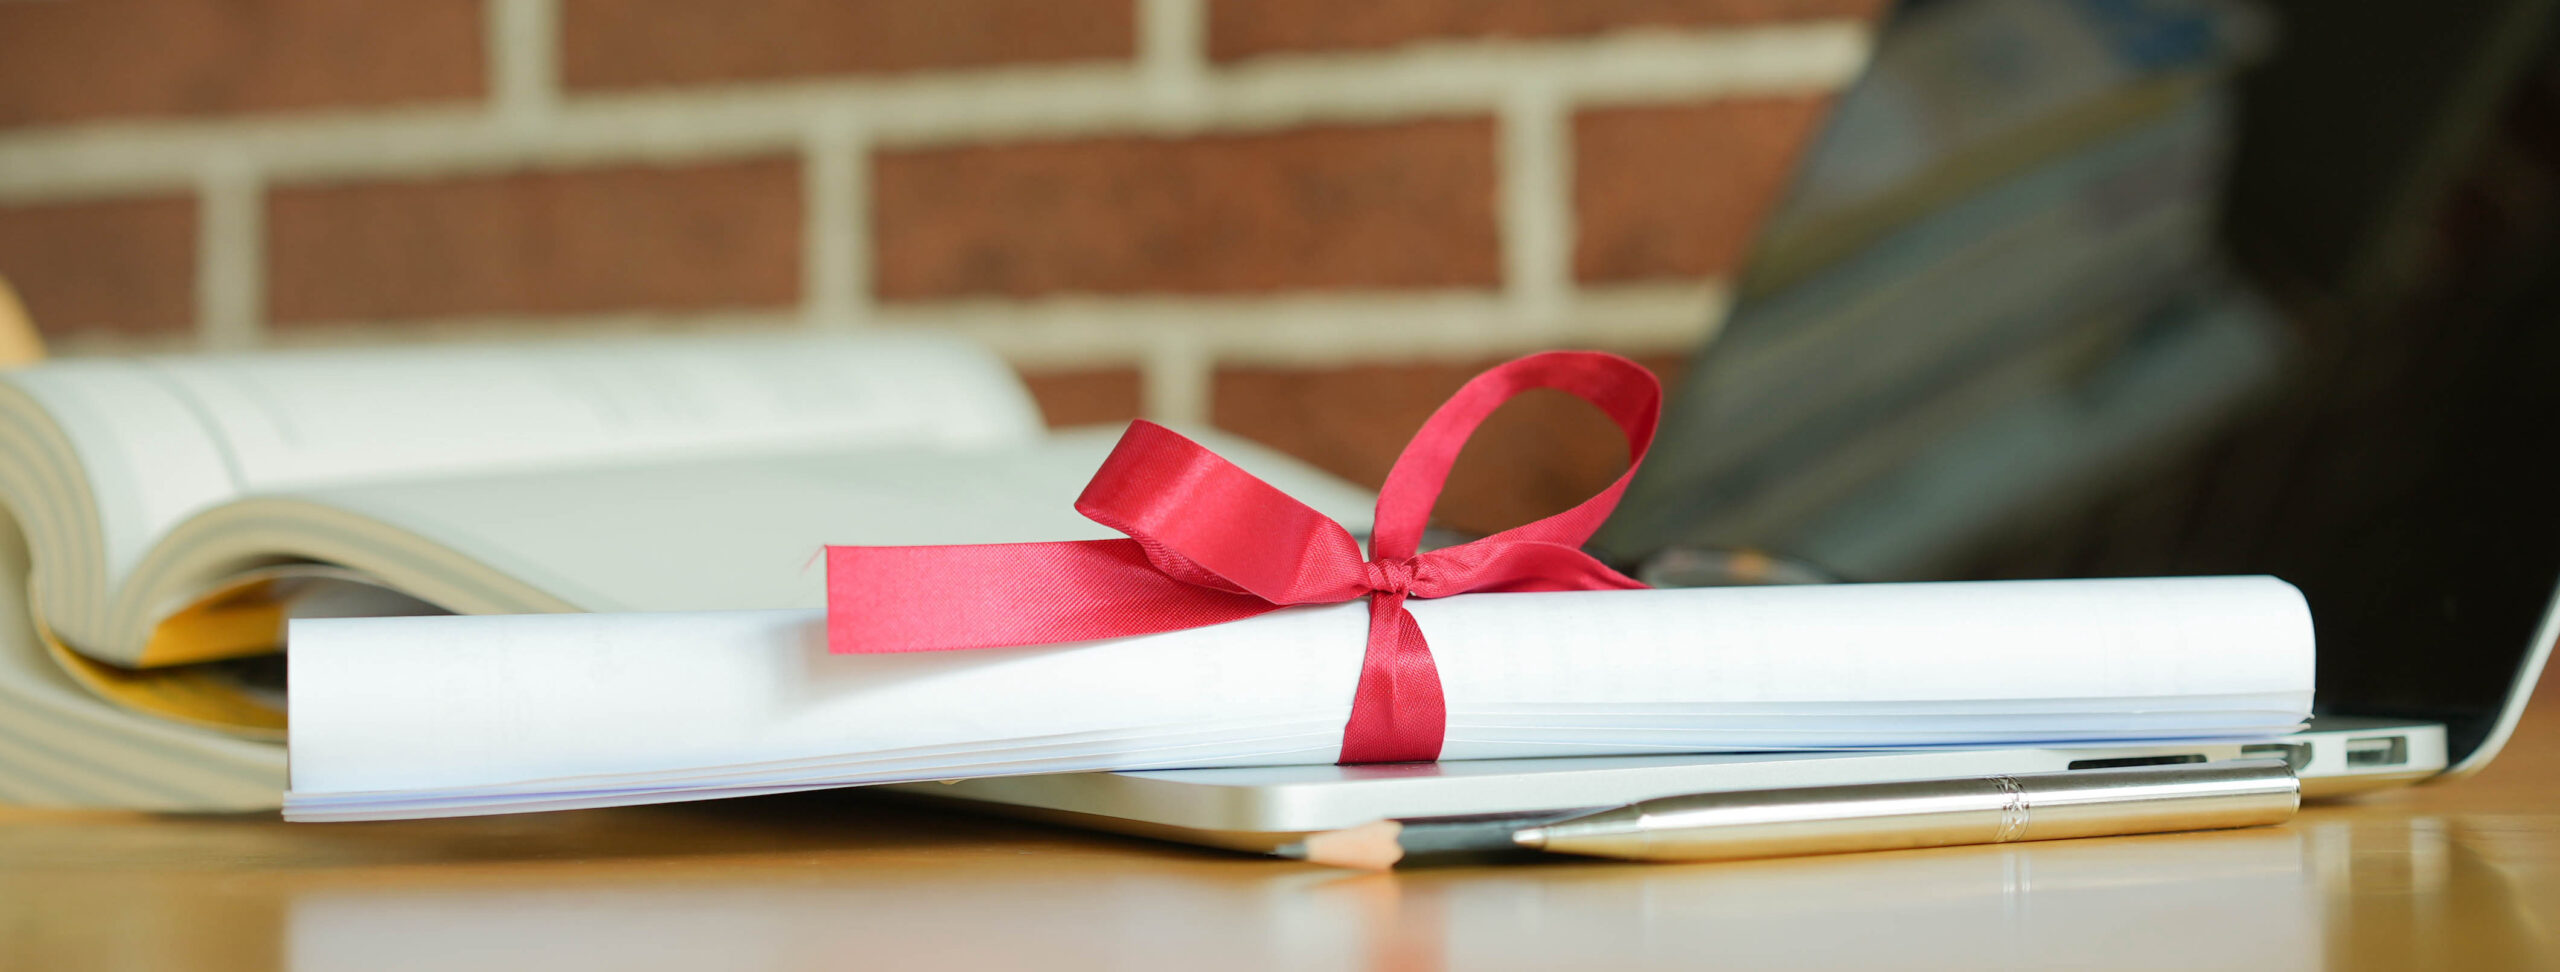 A rolled up piece of paper tied with a red ribbon on a desk.